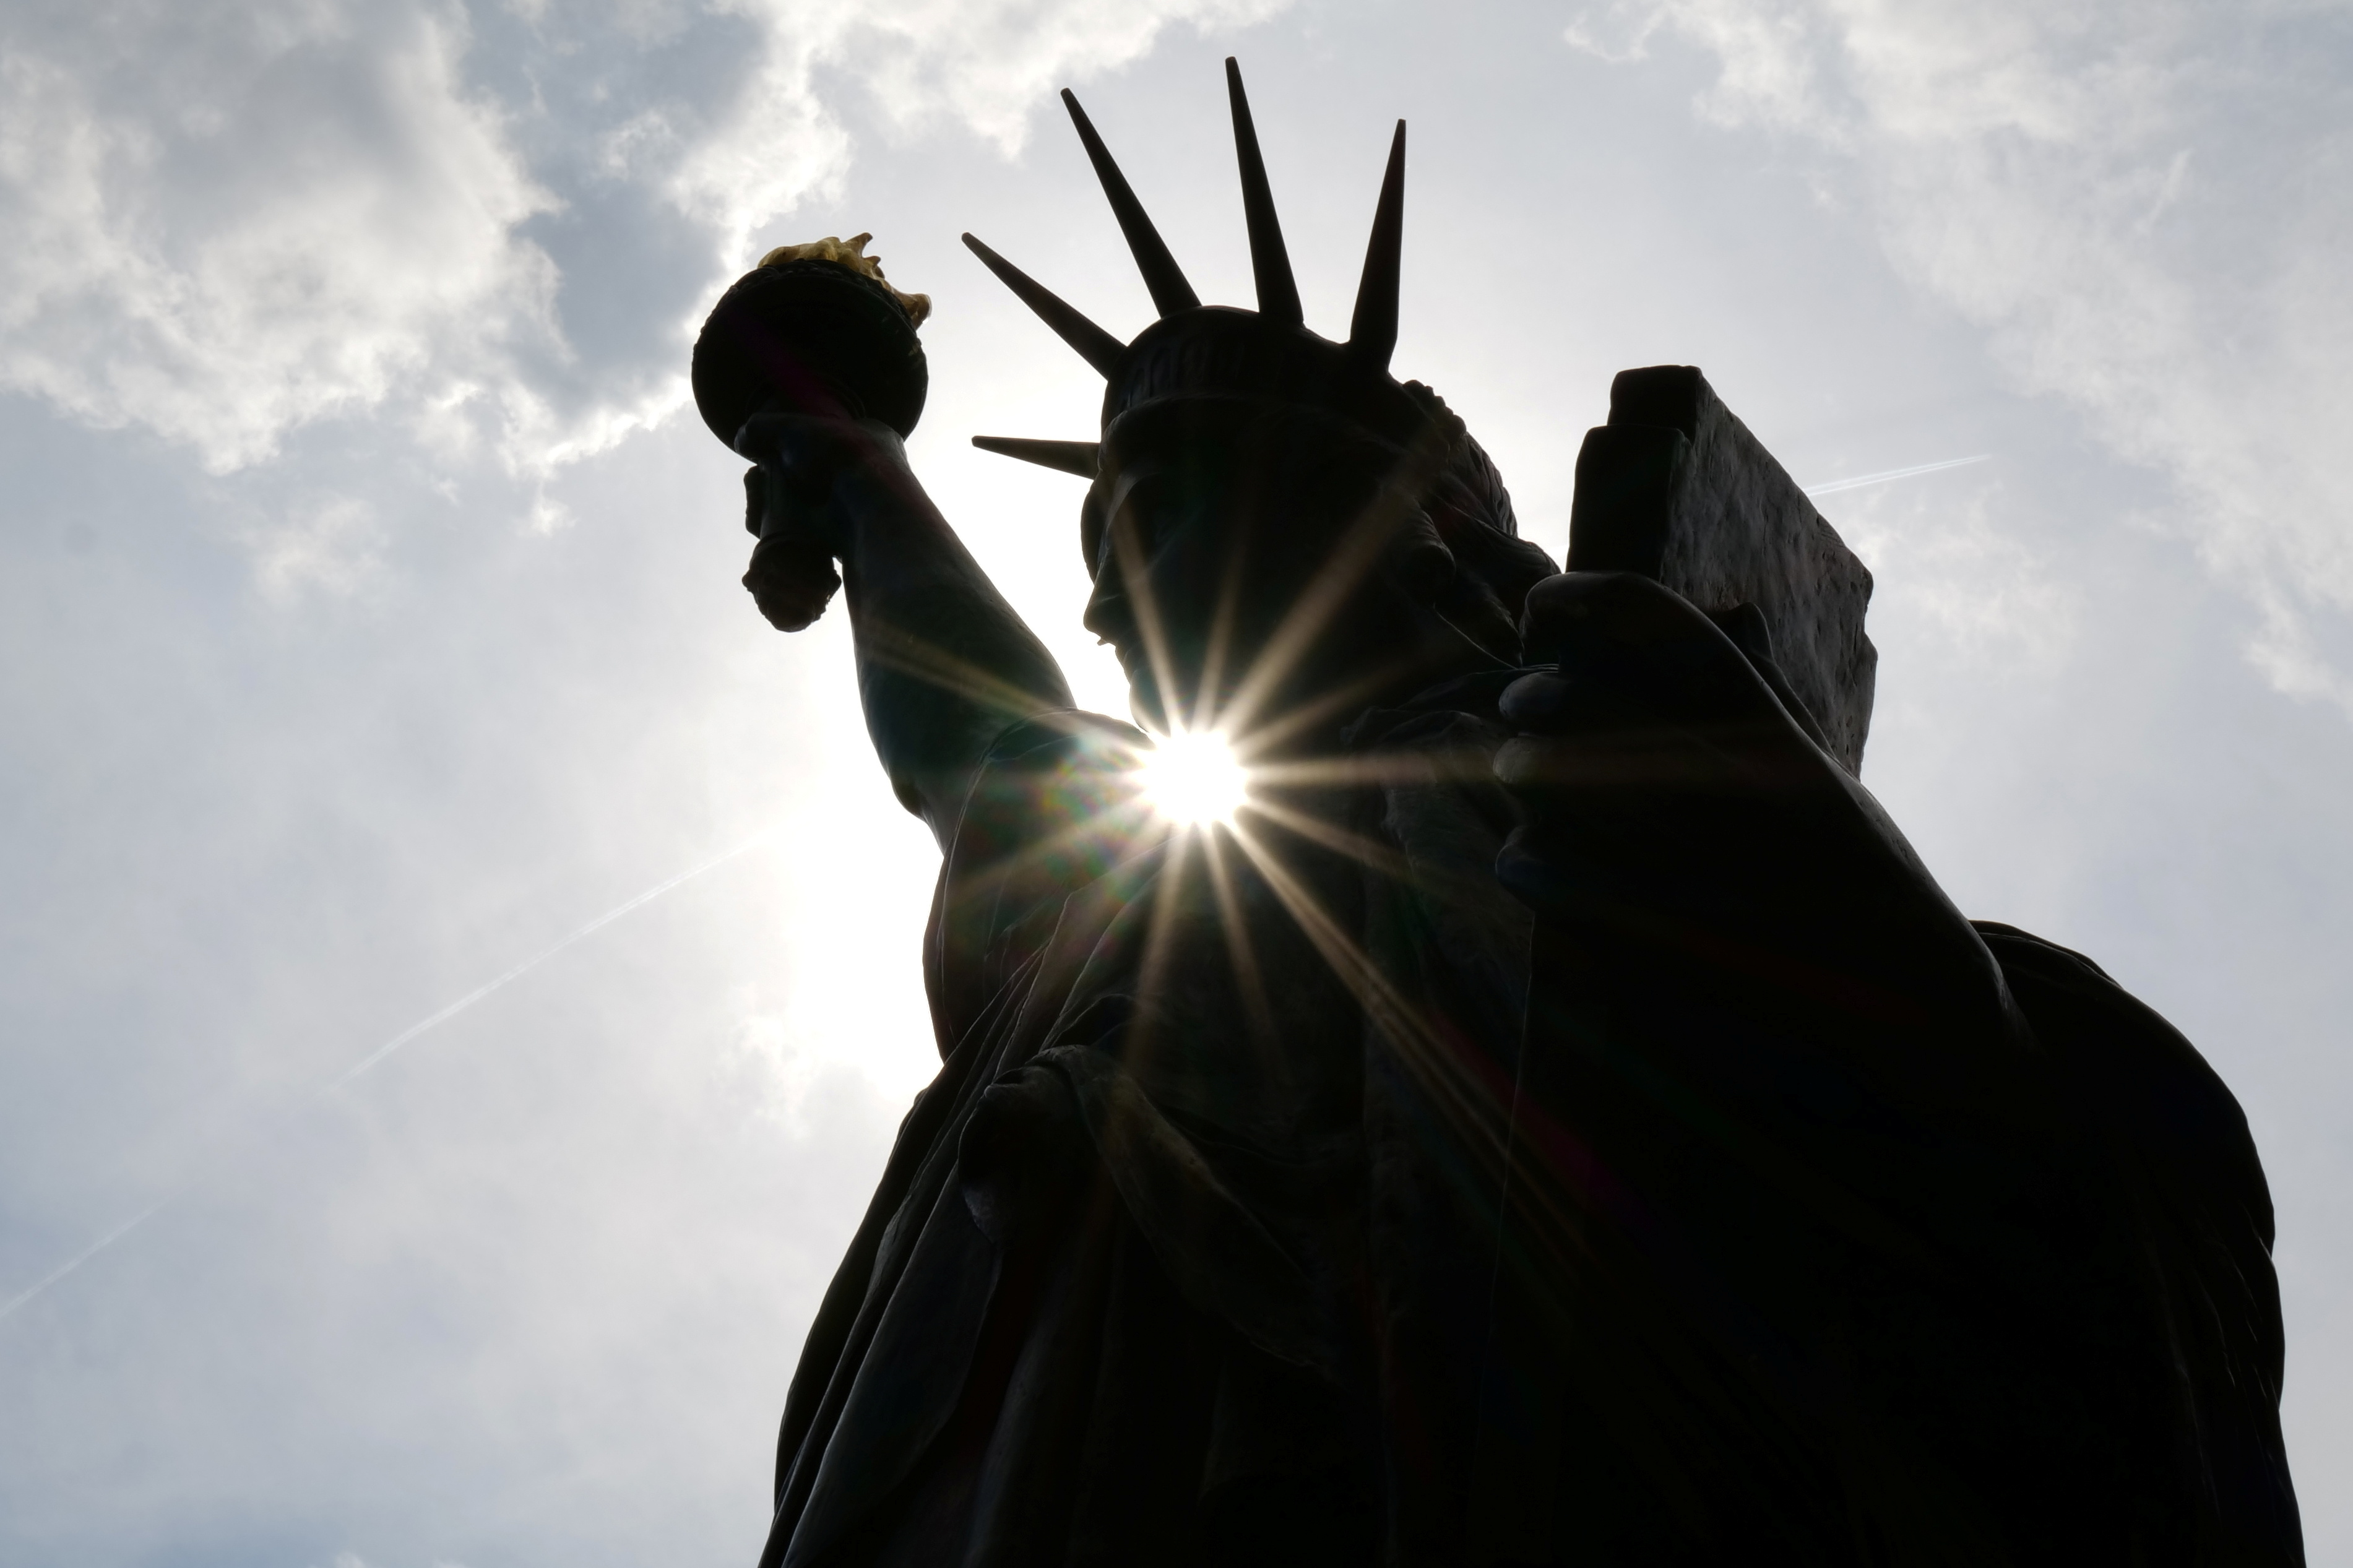 French museum to send U.S. second Lady Liberty to rekindle friendship